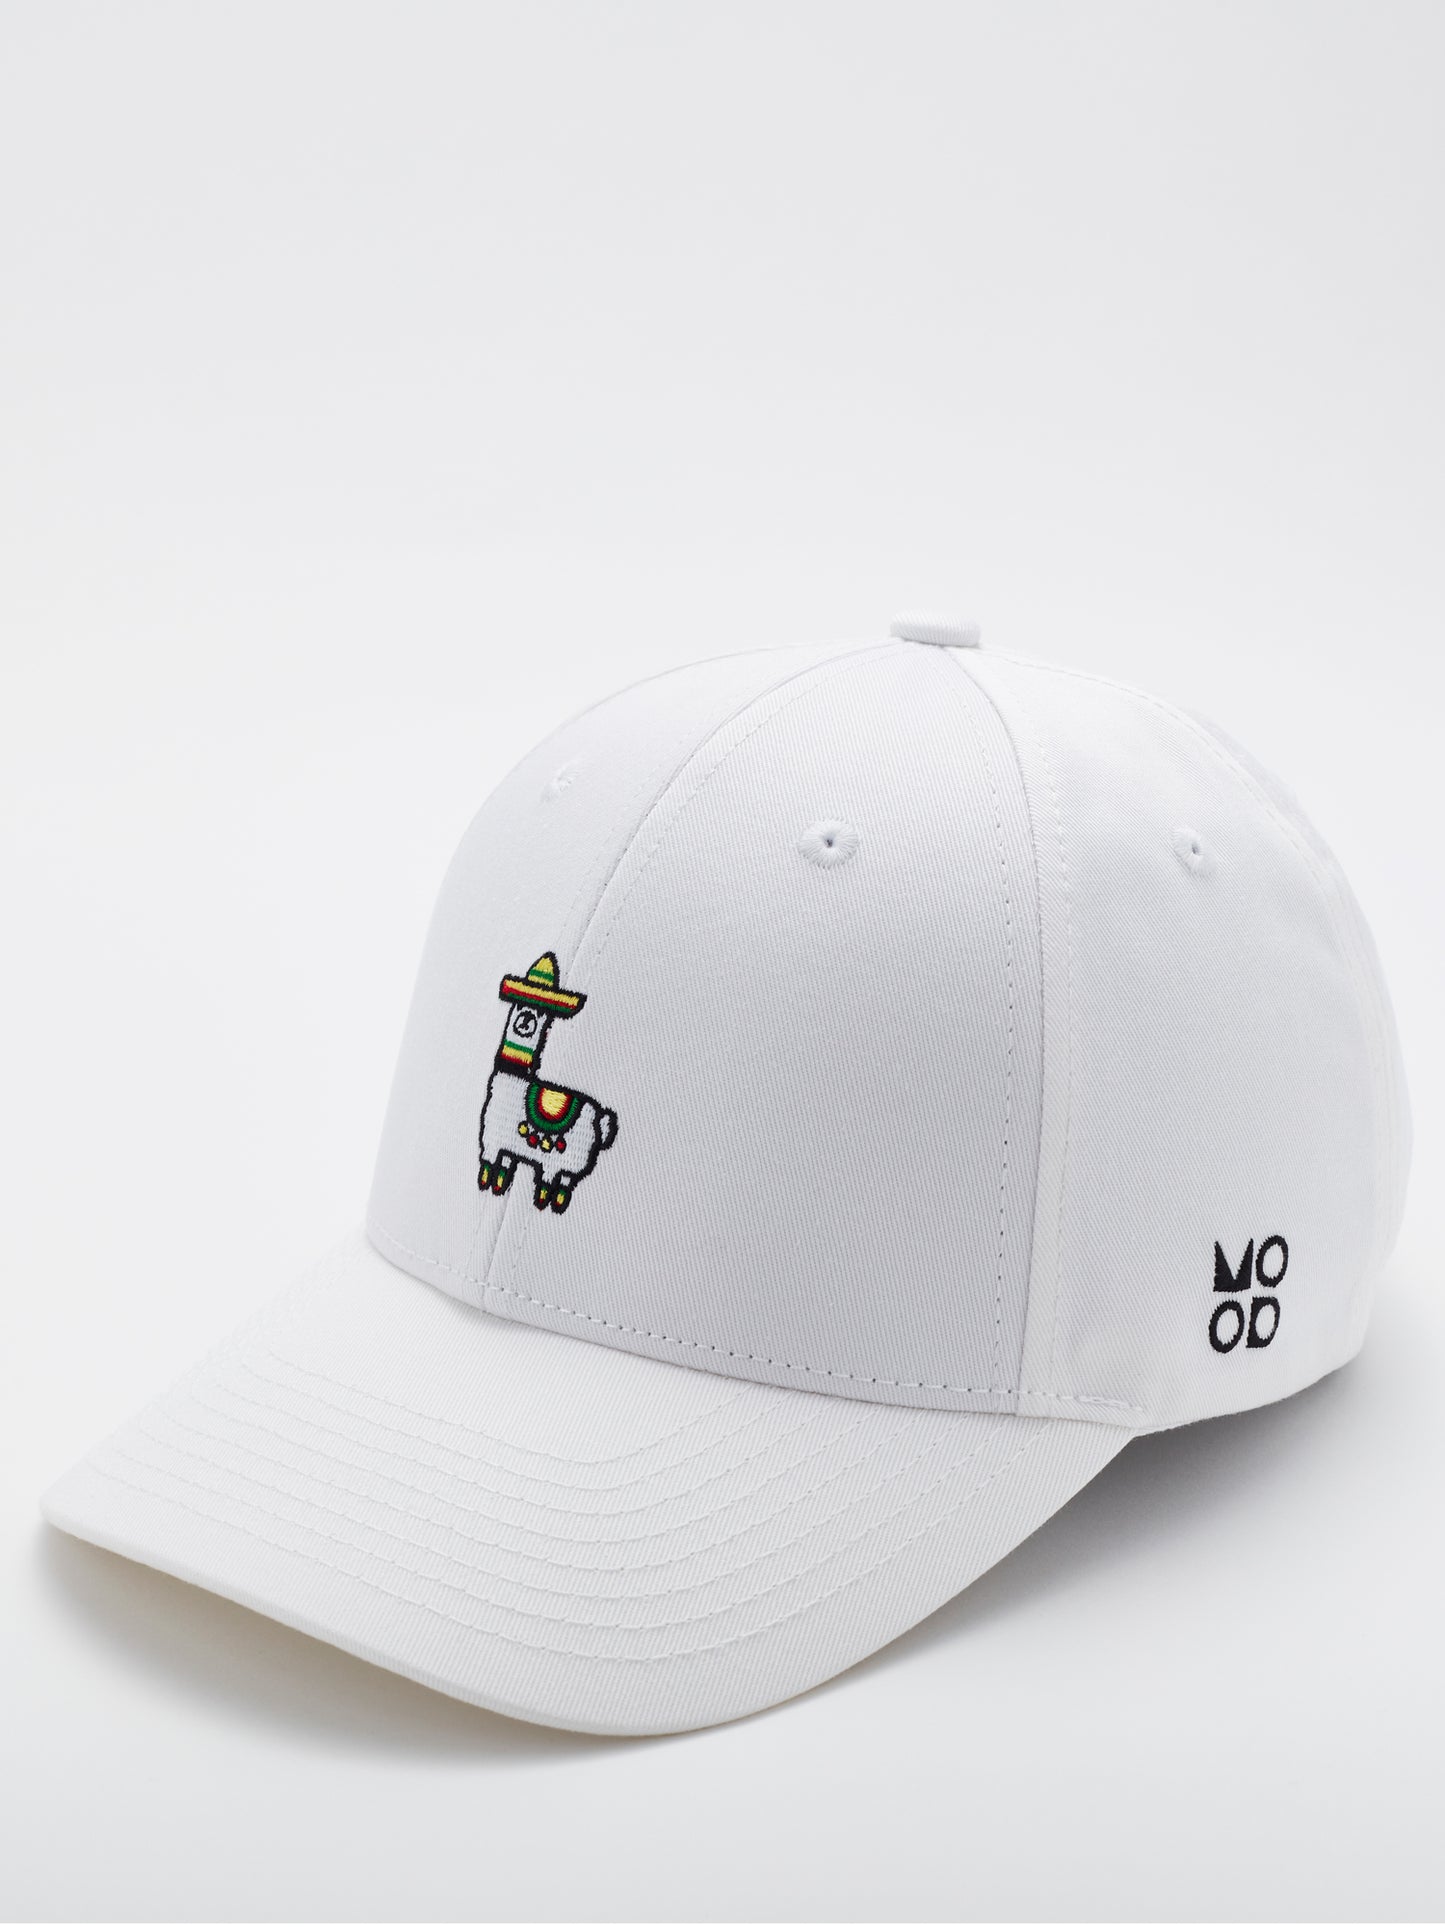 Load image into Gallery viewer, MOOD Brand - Mexillama baseball cap in white color - side view
